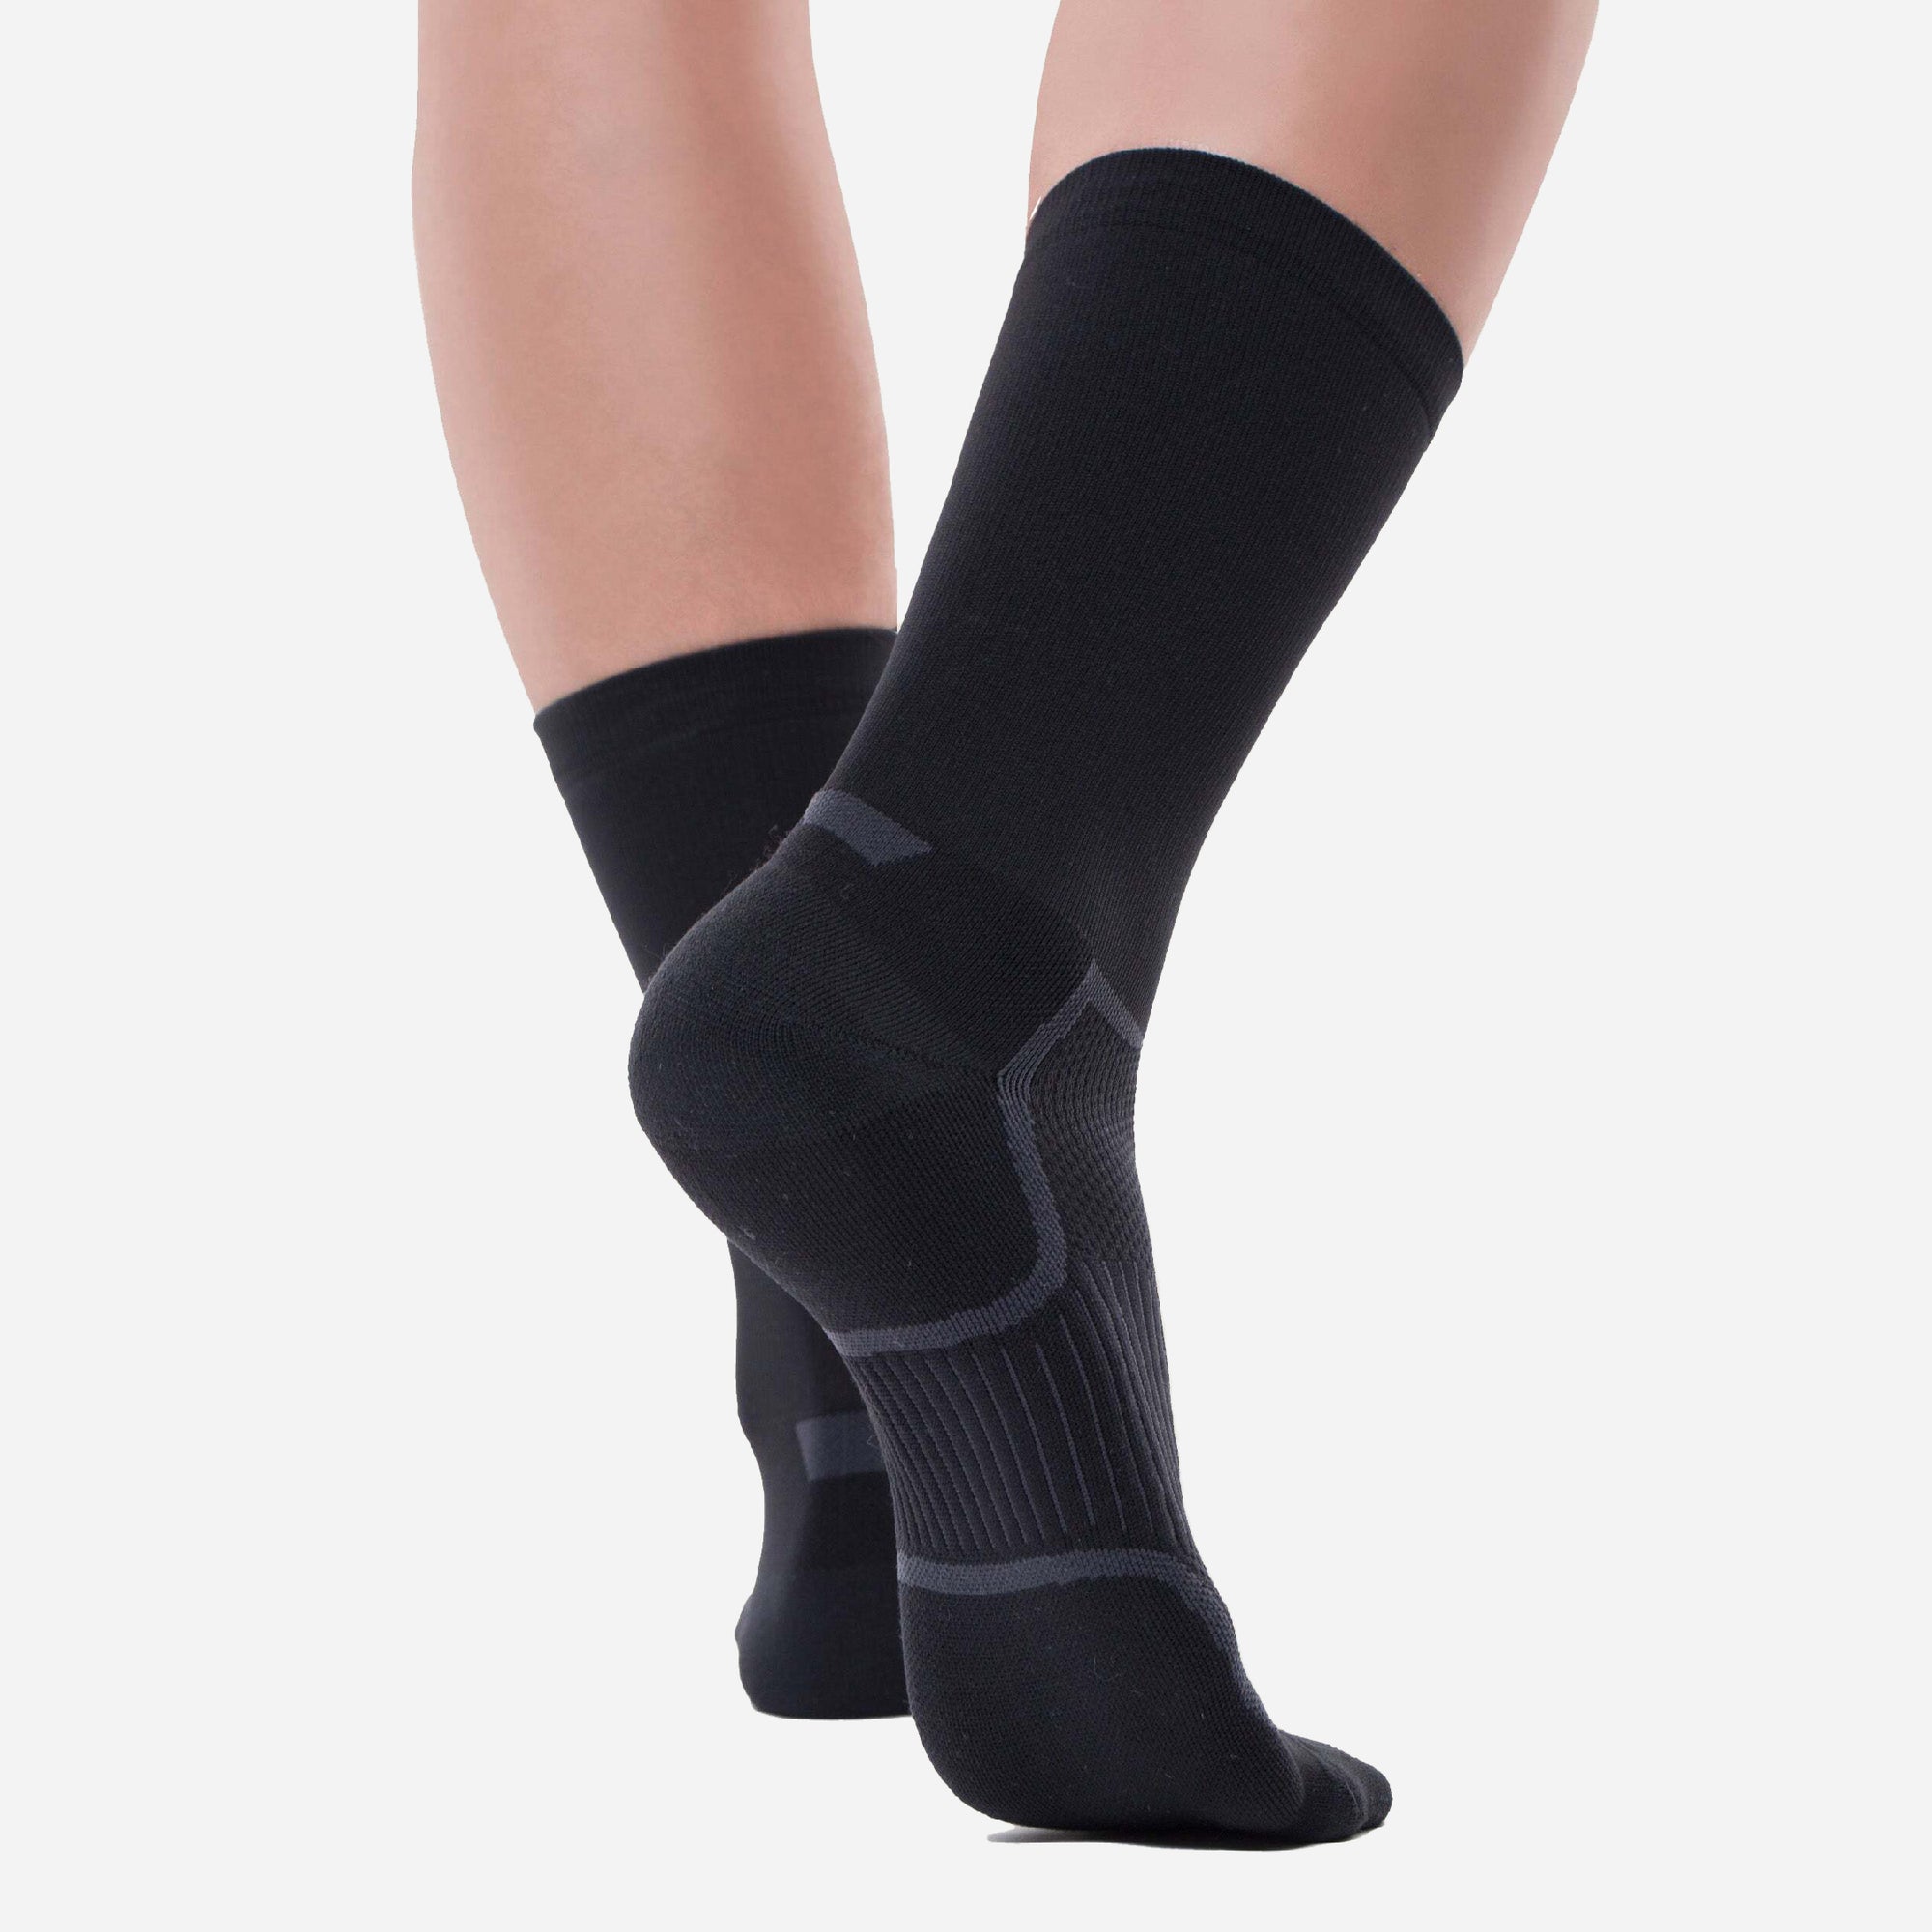 Buy Improved Energy Crew Compression Socks at Copper Fit USA®